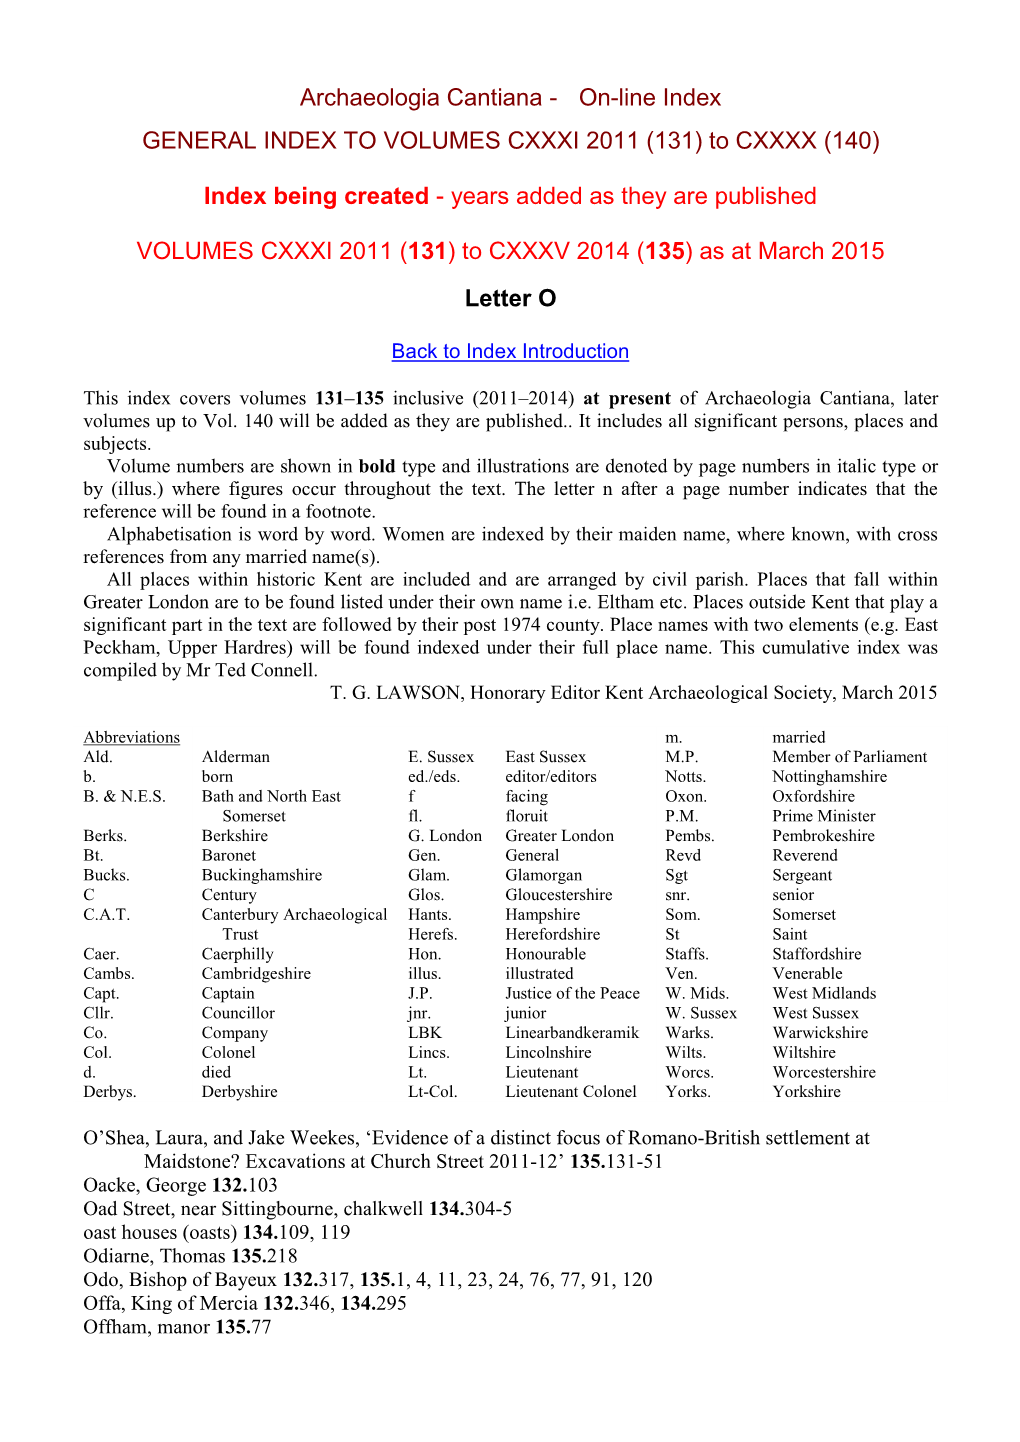 Archaeologia Cantiana - On-Line Index GENERAL INDEX to VOLUMES CXXXI 2011 (131) to CXXXX (140)